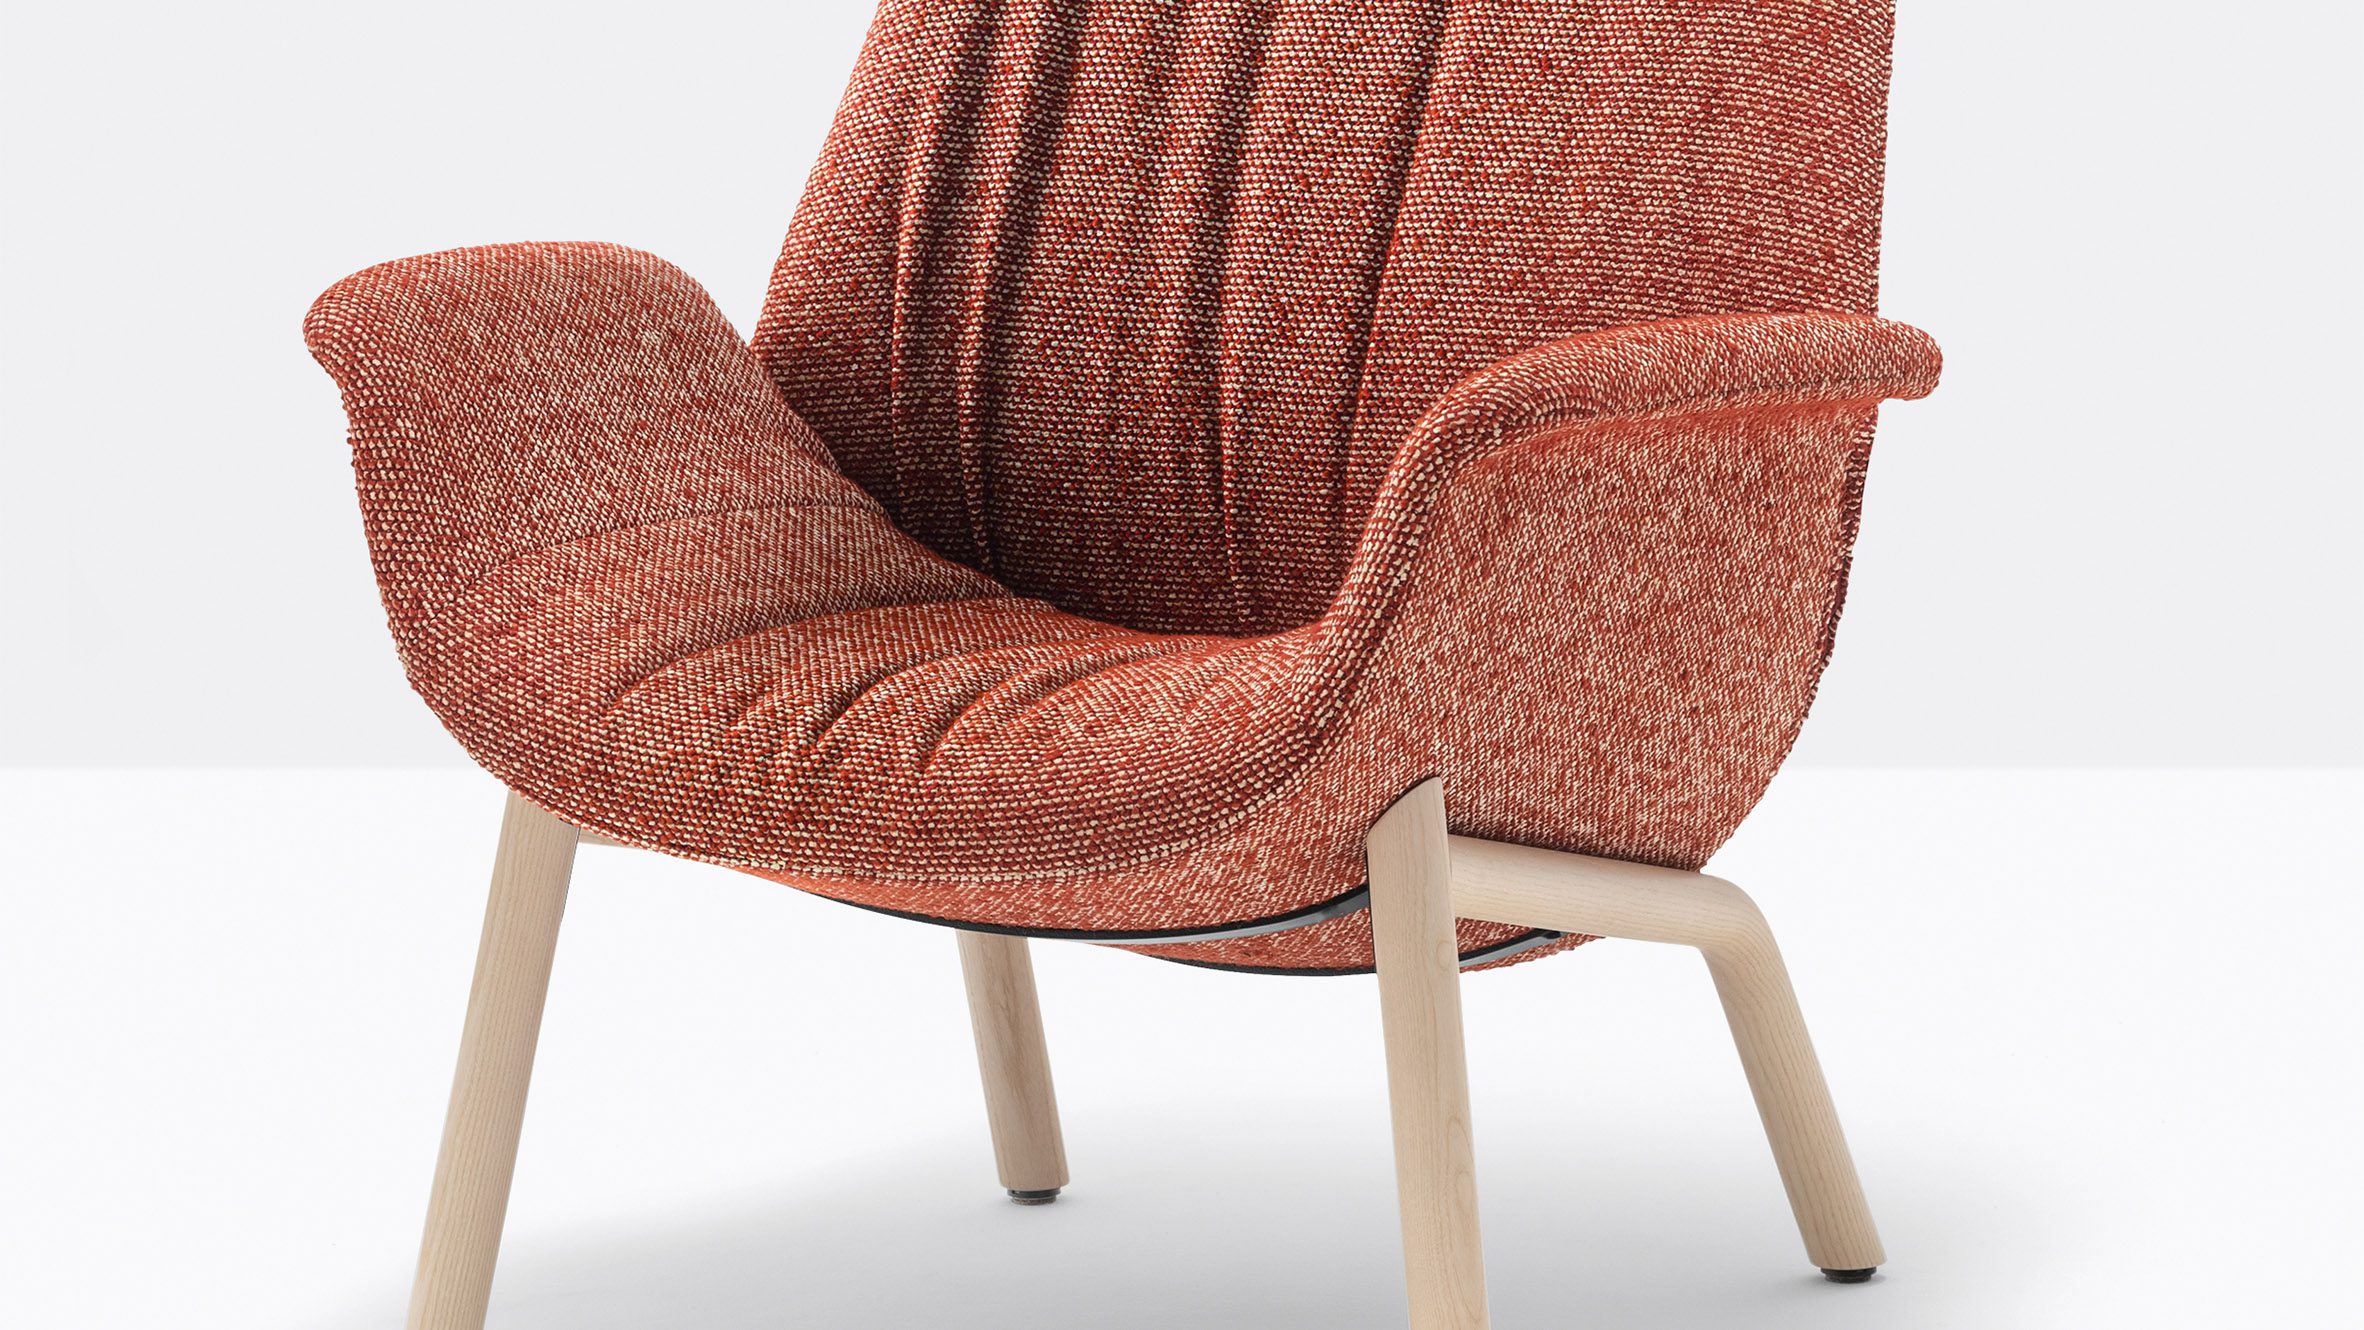 Ila chair by Patrick Jouin for Pedrali